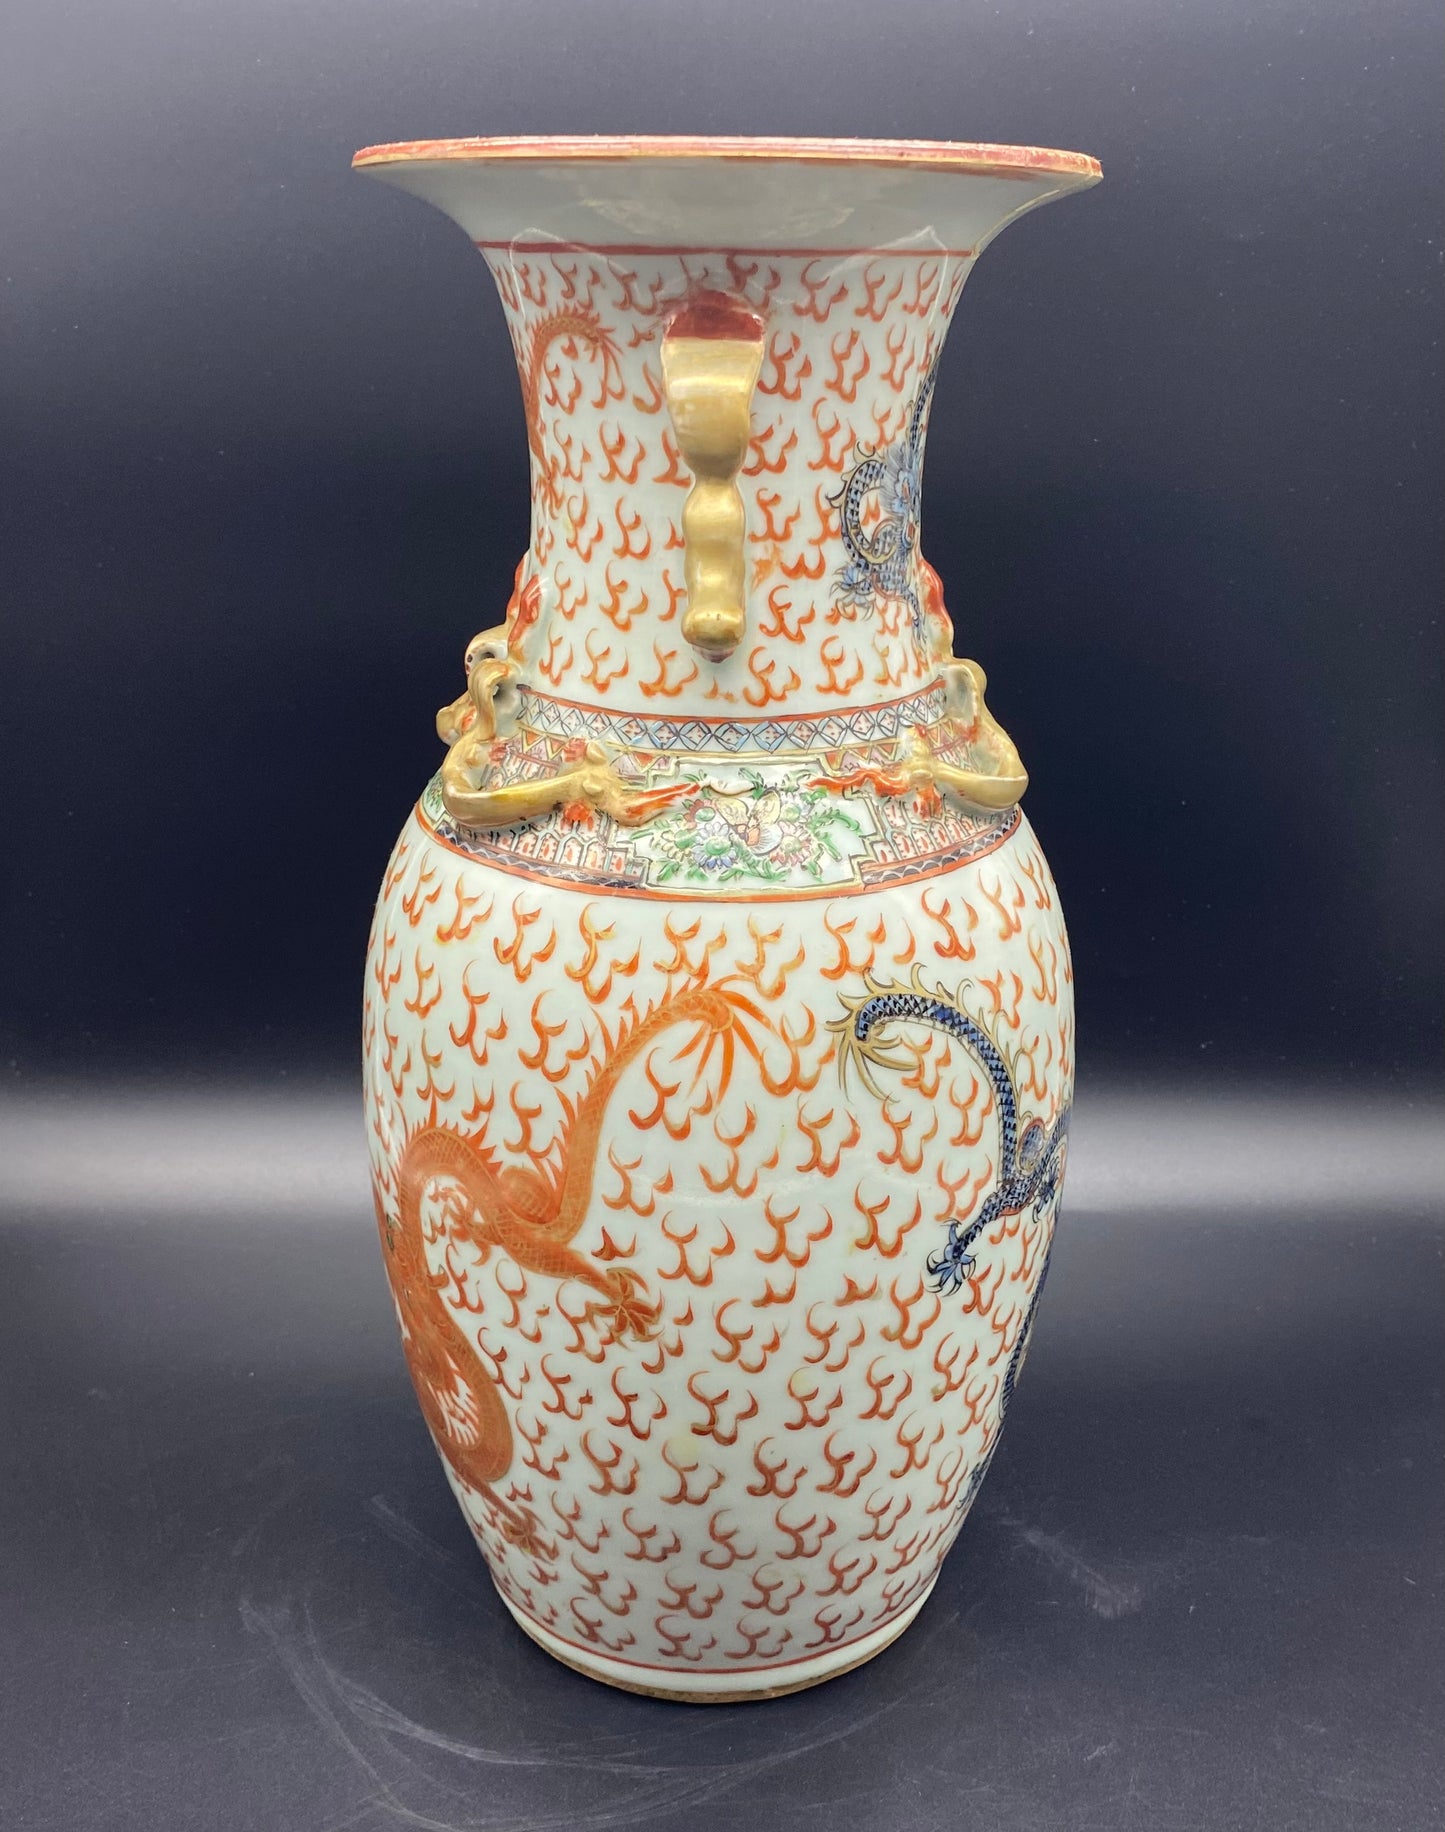 KBantiques Asian Art - Some examples of valuable Chinese pottery marks: Ming dynasty (1368-1644): Porcelain from this time was marked with the emperor's reign mark.